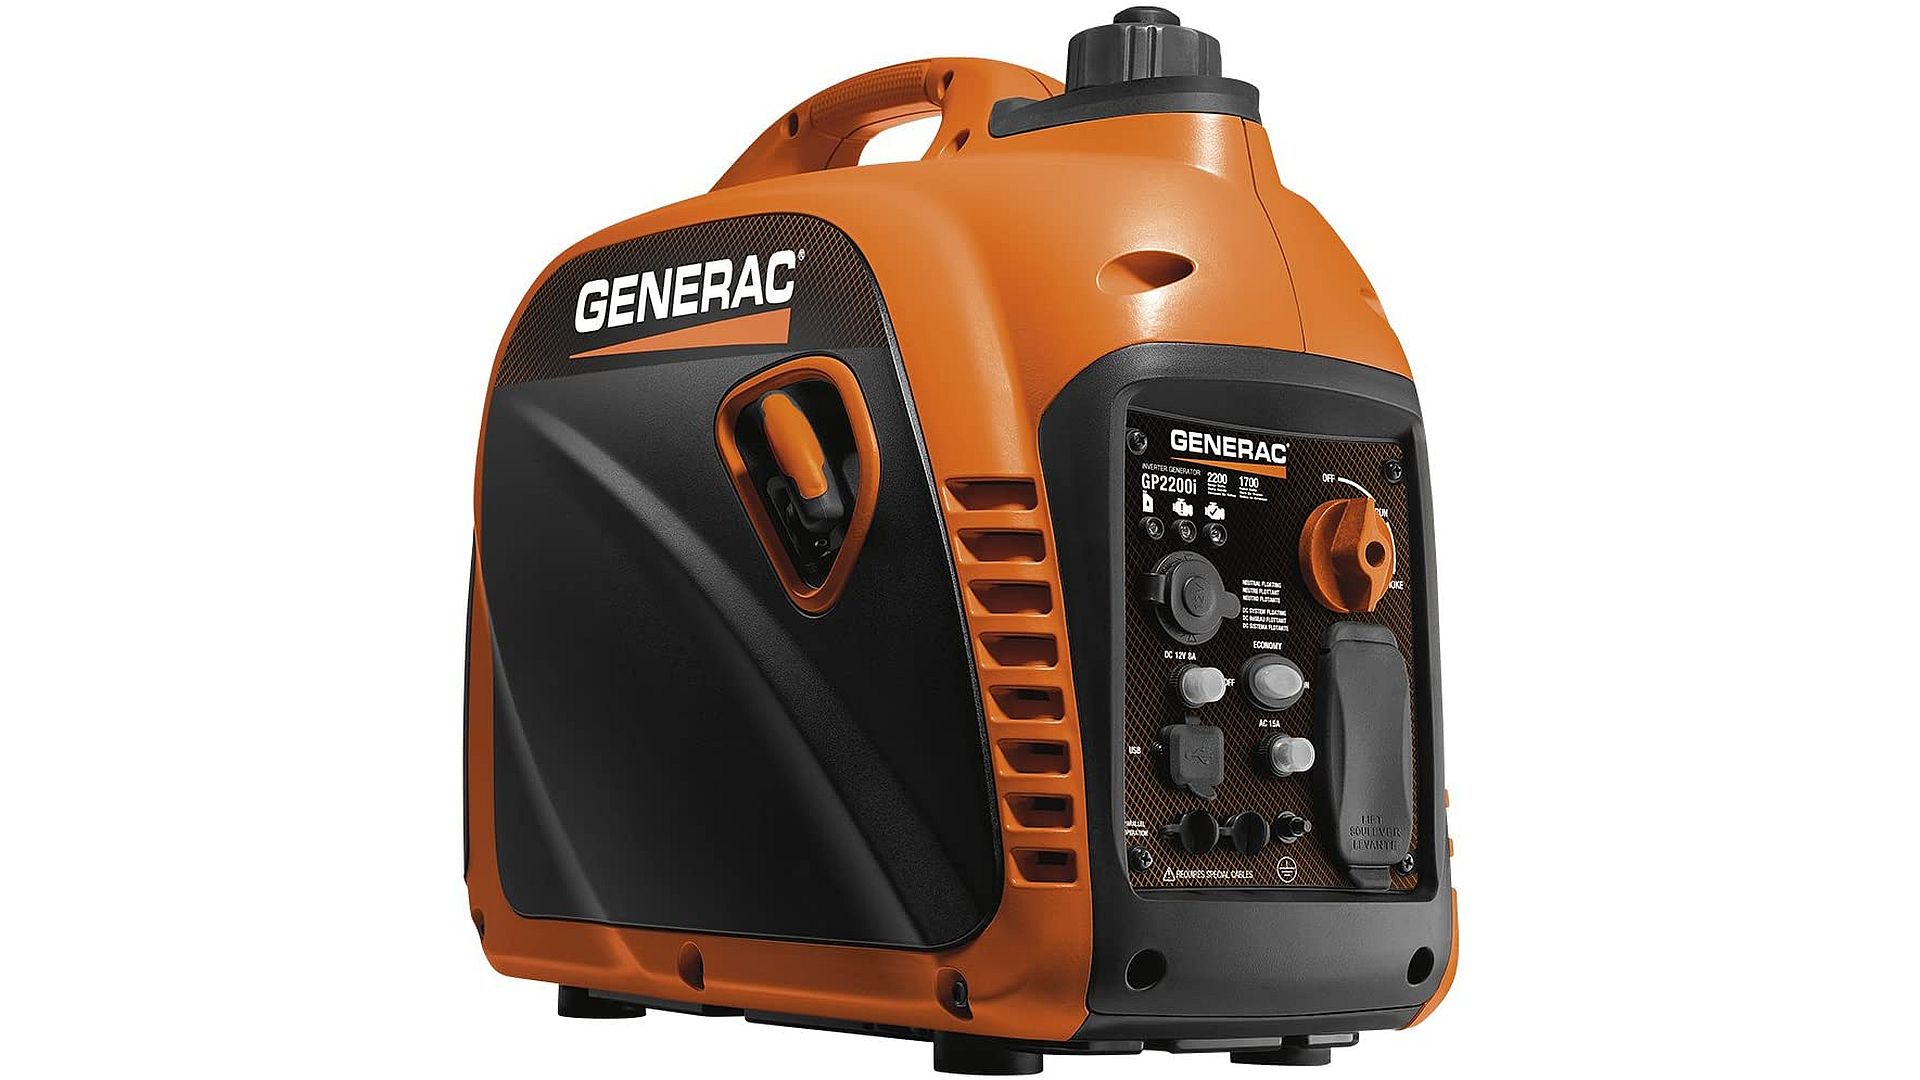 Generac GP2200i Review: 1700 Watts Clean Power At Low Price